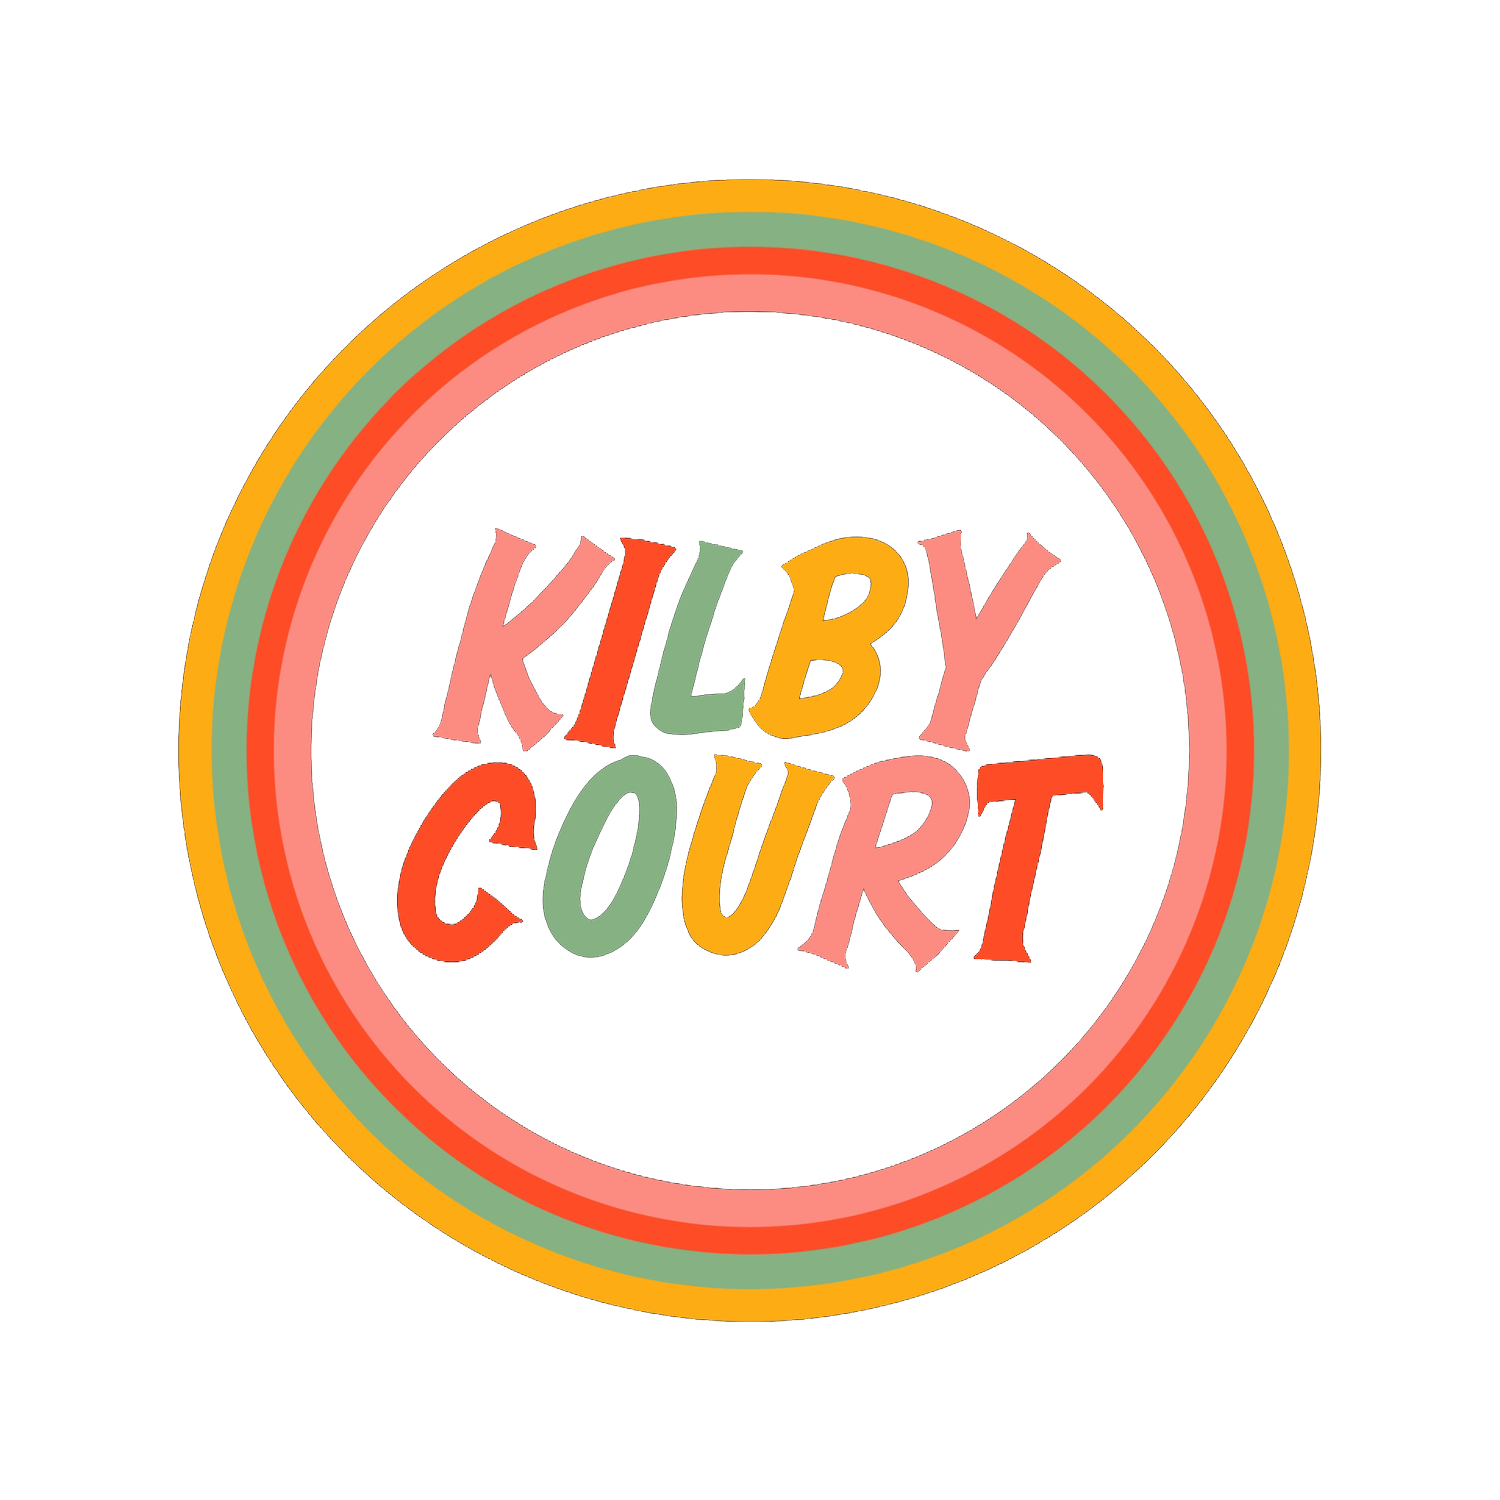 Line Up — Kilby Block Party